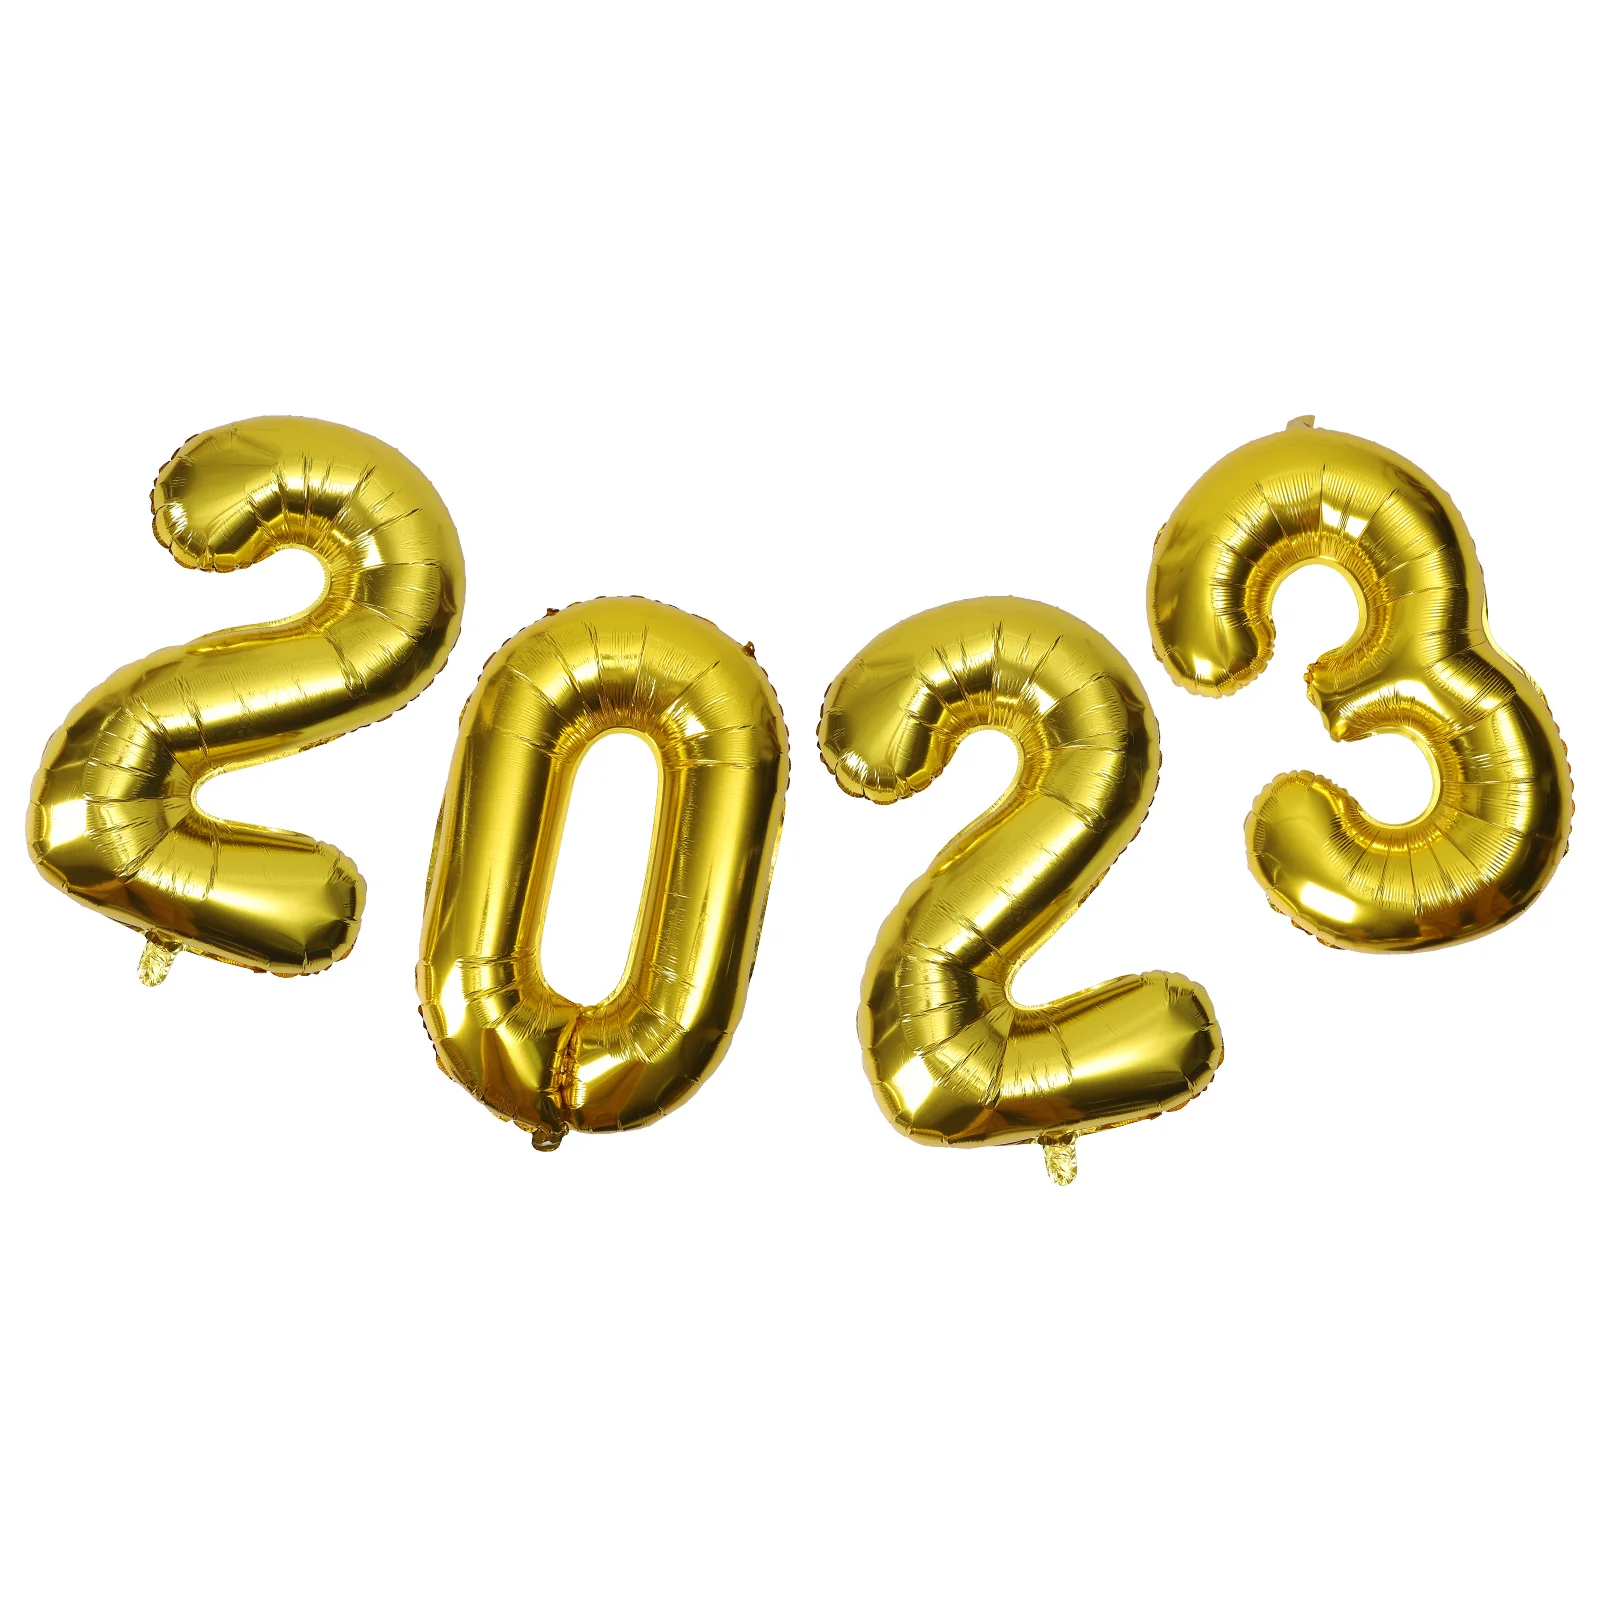 

Balloons Balloon Number New Year Party Foil Birthday Eve Years Graduation Happy Helium Gold Decor Digital Mylar Decorations